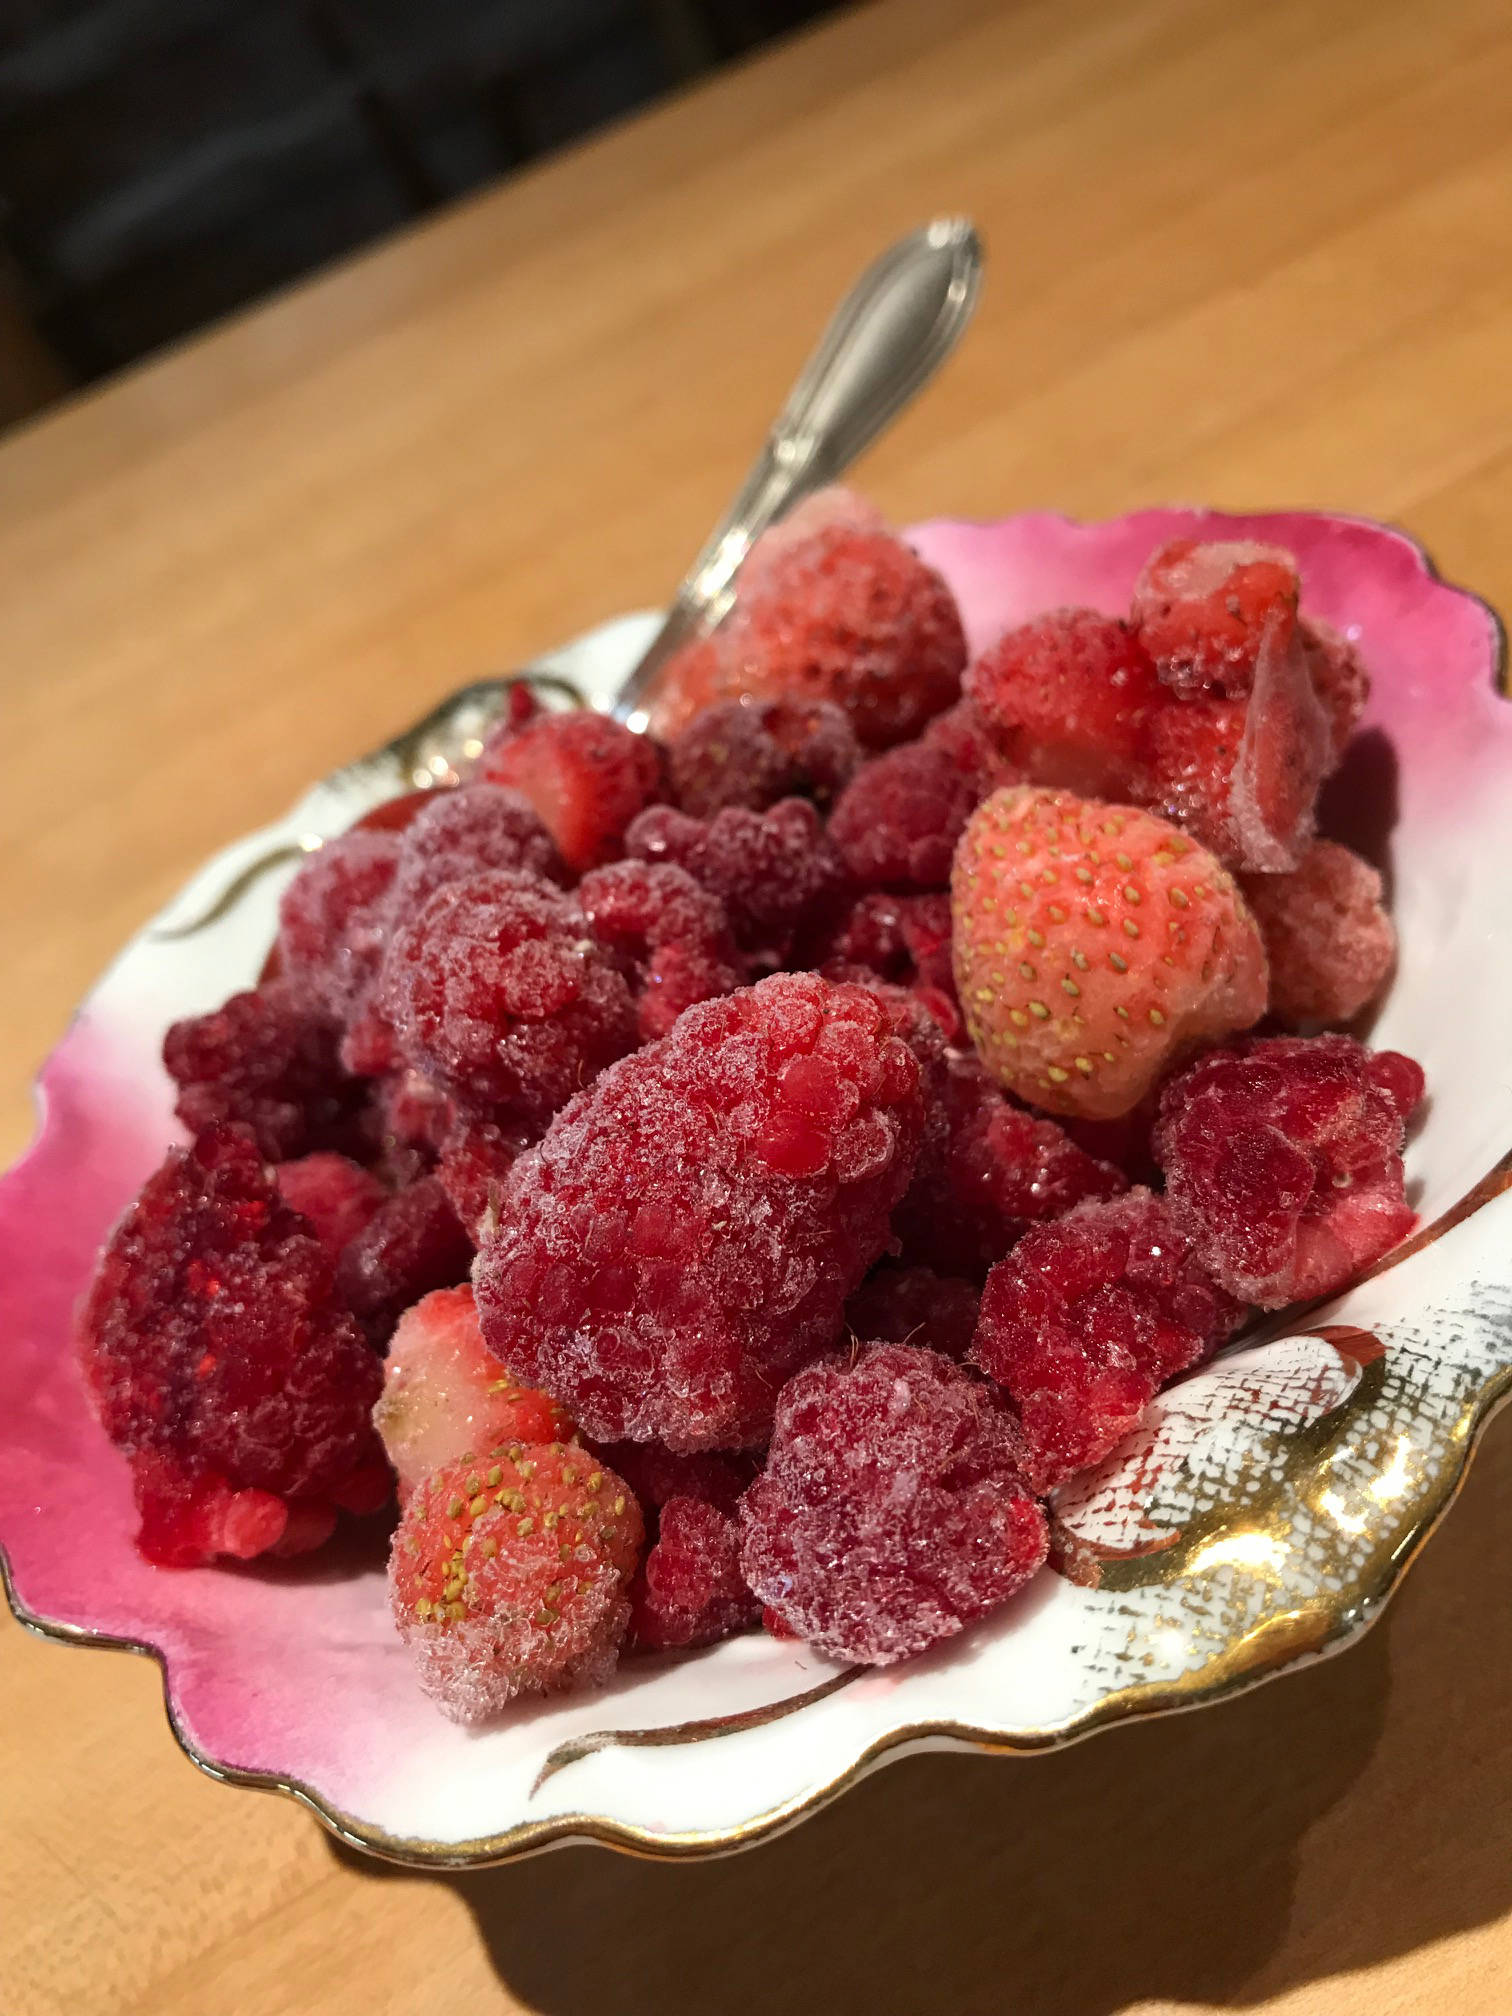 Strawberries and raspberries picked at their peak of perfection, popped into the freezer to be savored throughout the long, dark winter months. What better reason to garden? (Photo by Cecilia Fitzpatrick)